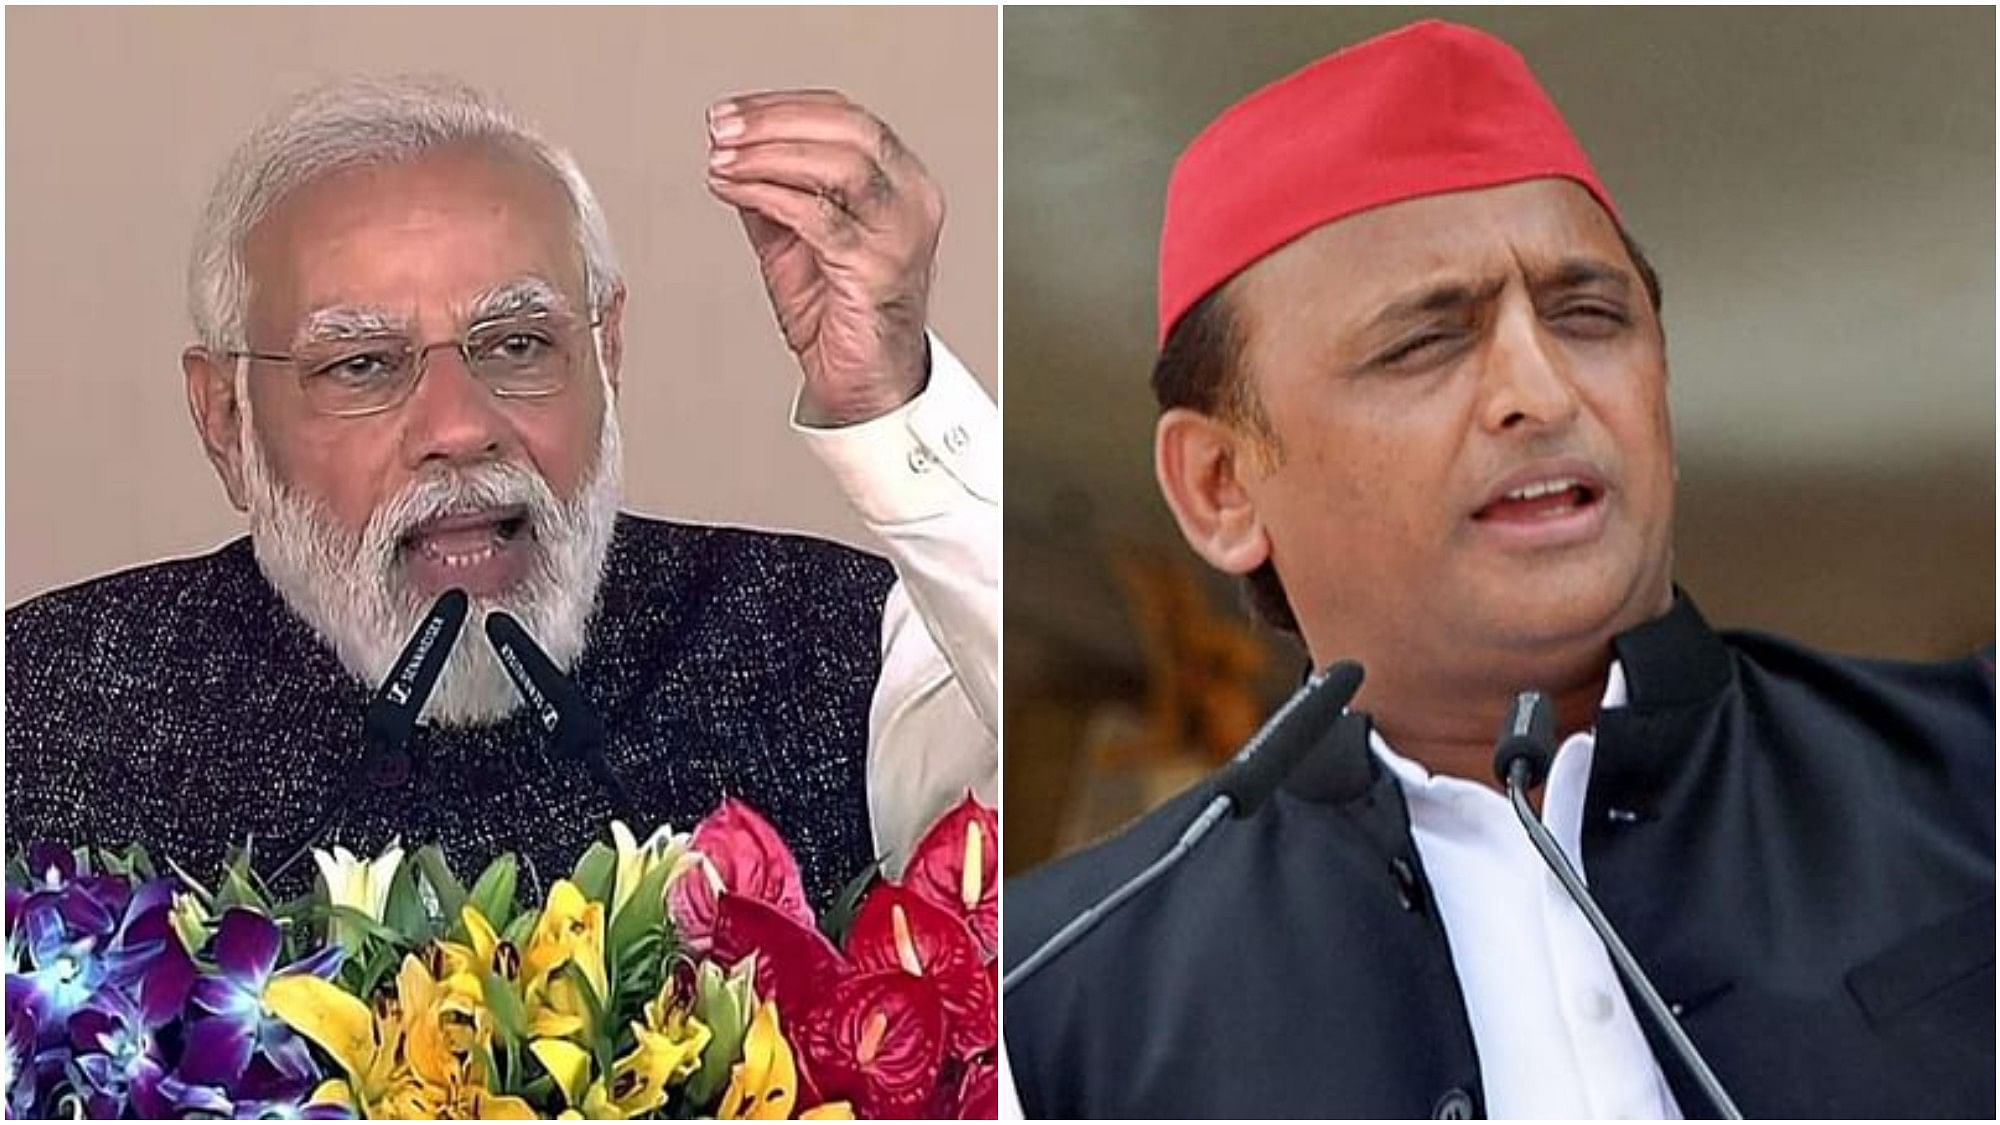 PM Modi says red-capped people spell 'red alert' for UP, Akhilesh Yadav hits back